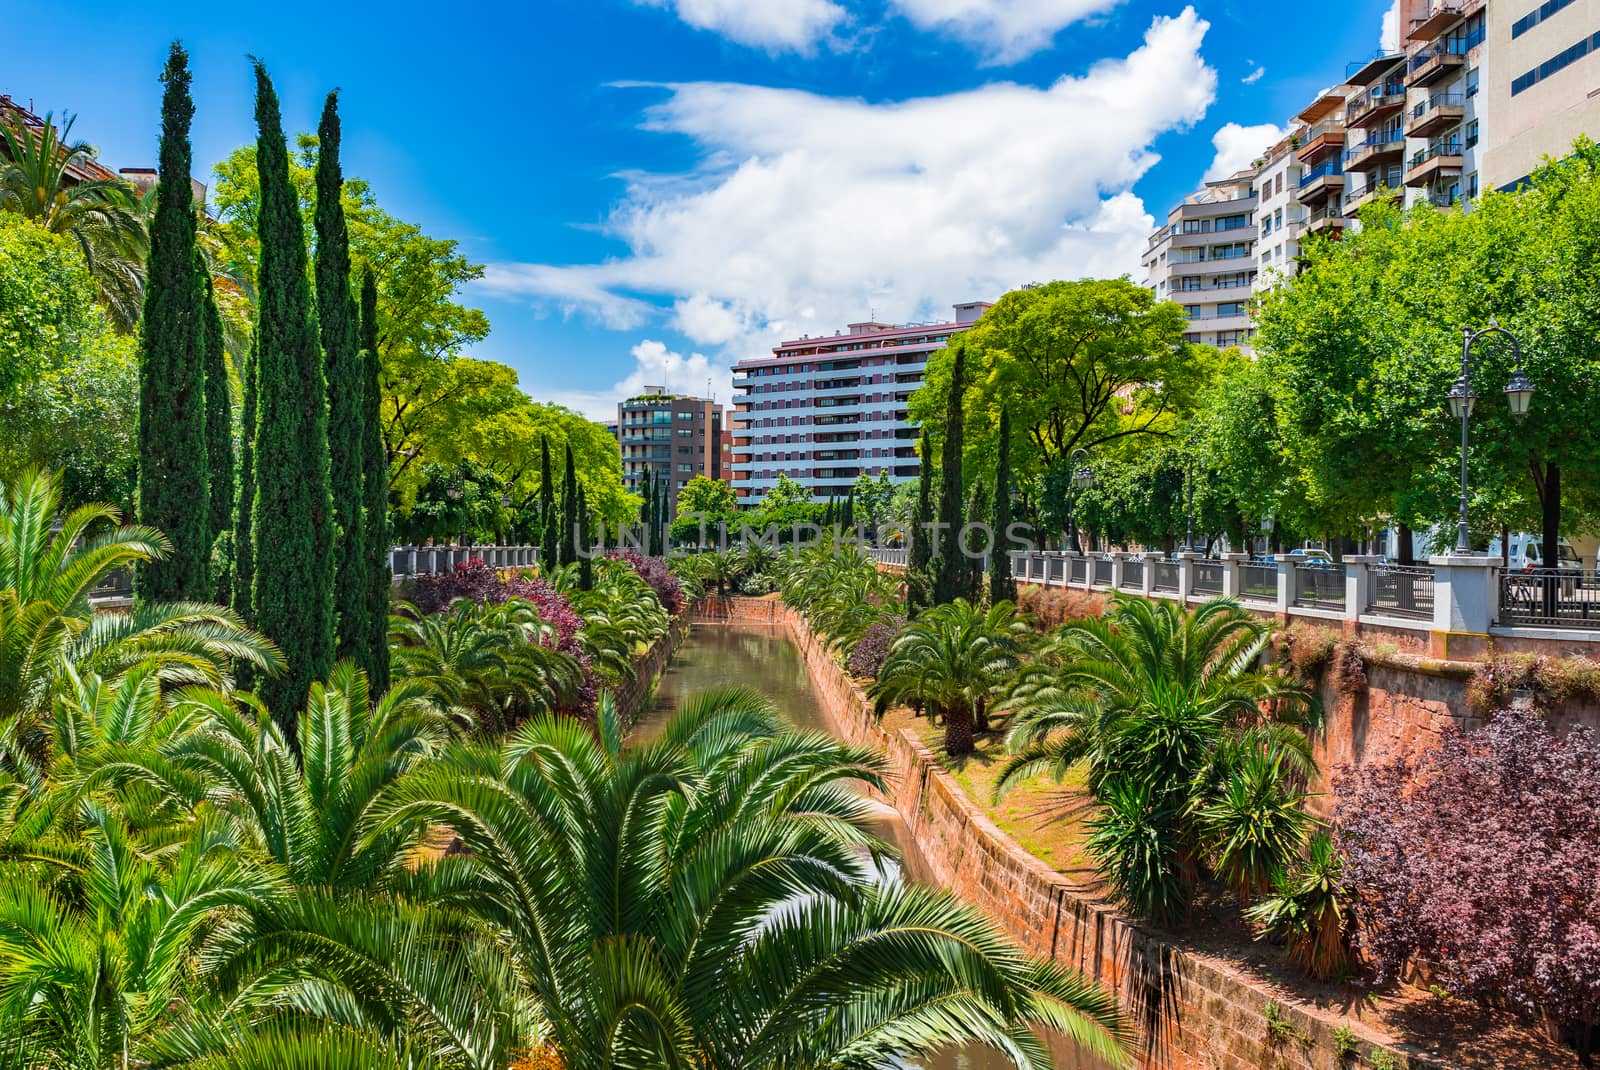 Citycape with water canal stream and park in Palma de Majorca, Spain